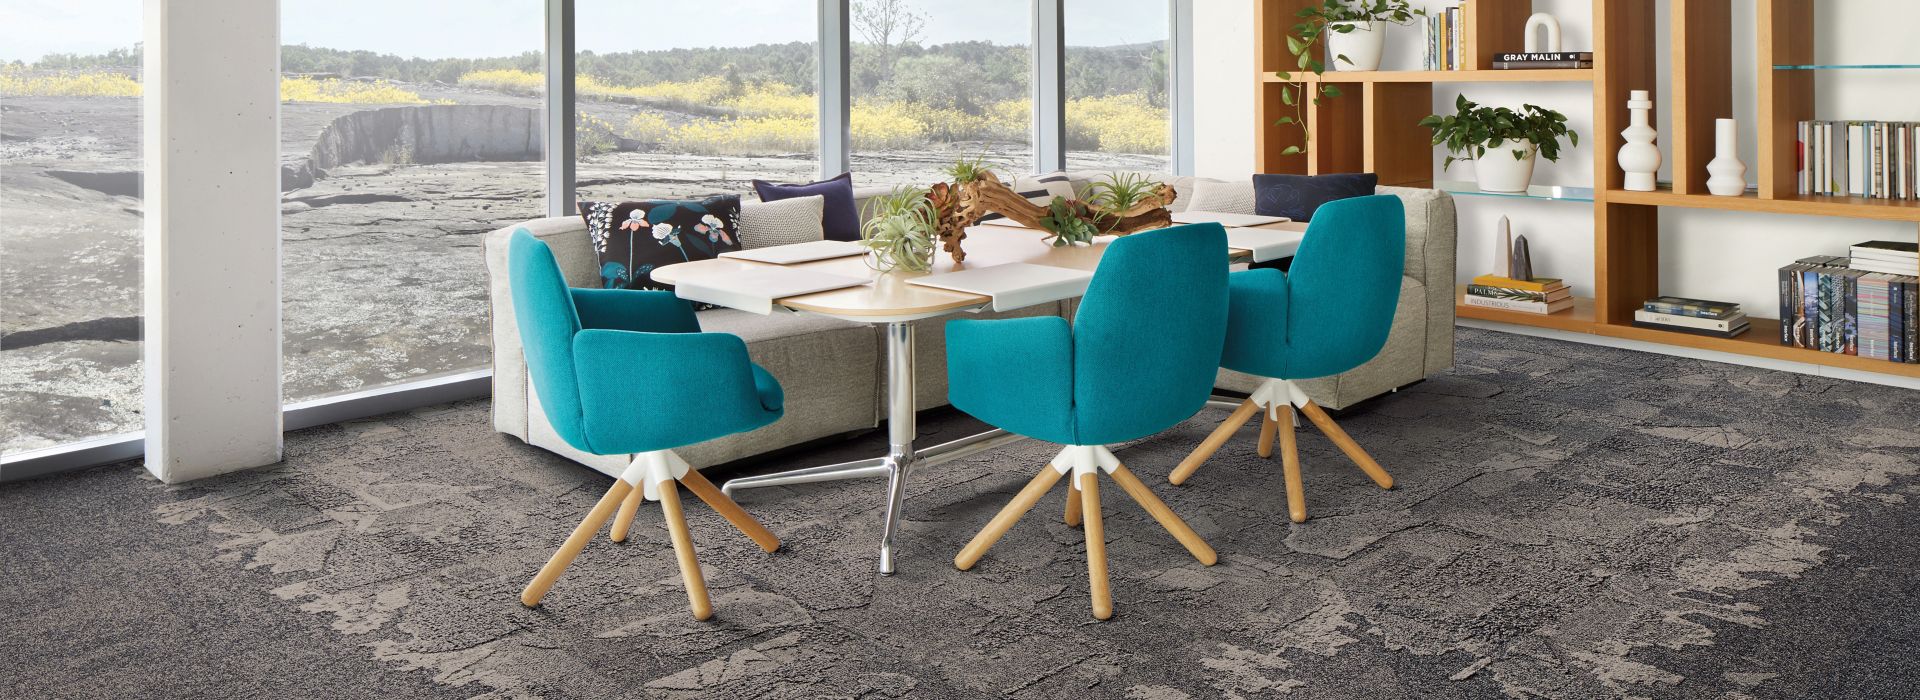 Interface Flat Rock, Bridge Creek, and Mountain Rock in private meeting room with blue chairs and large windows